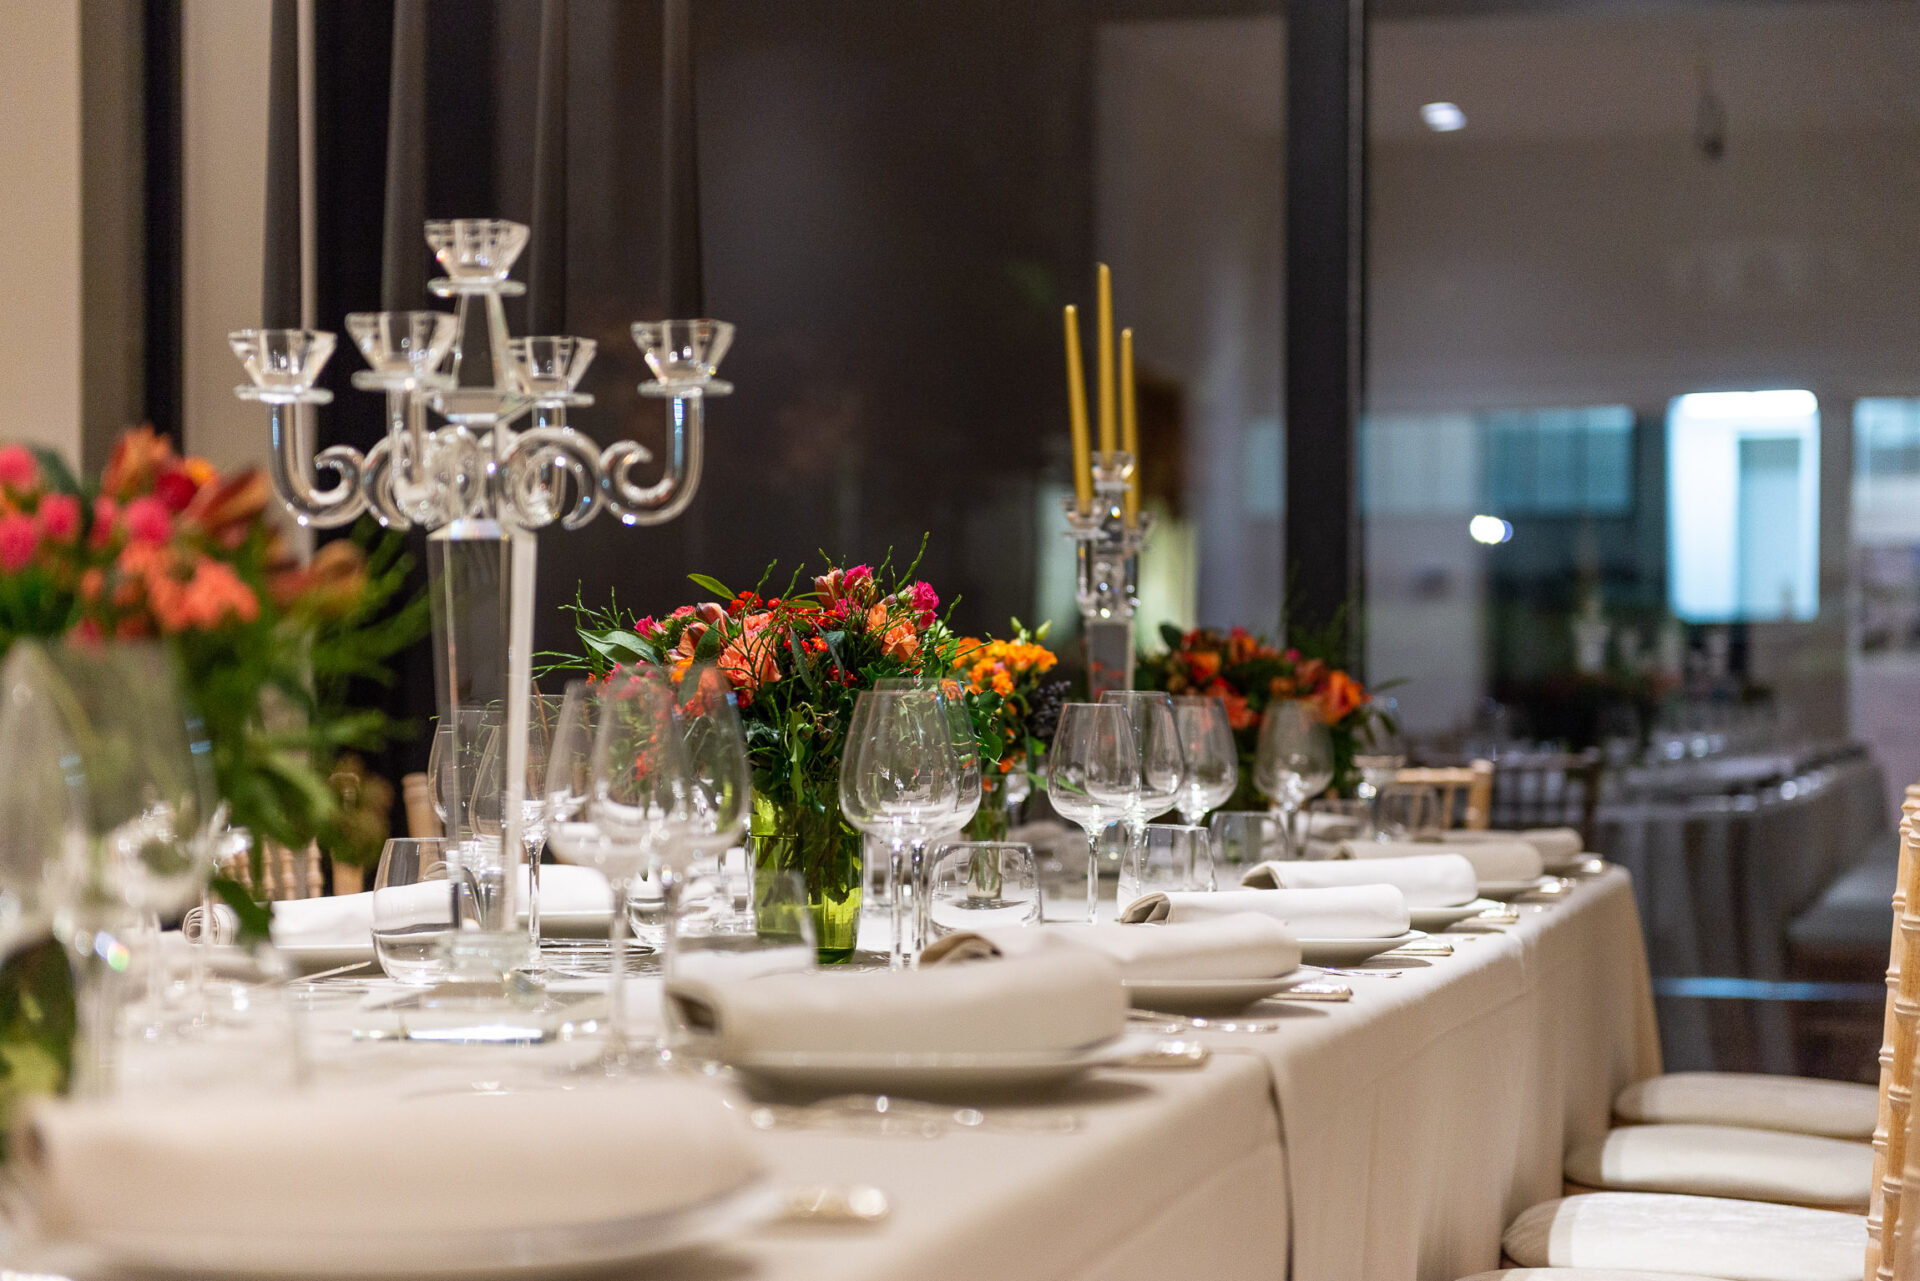 Beautiful floral decoration by Nouveau and a wonderful table decoration by Maison Demeuldre during this dinner organized by Belgium Sotheby's International Realty